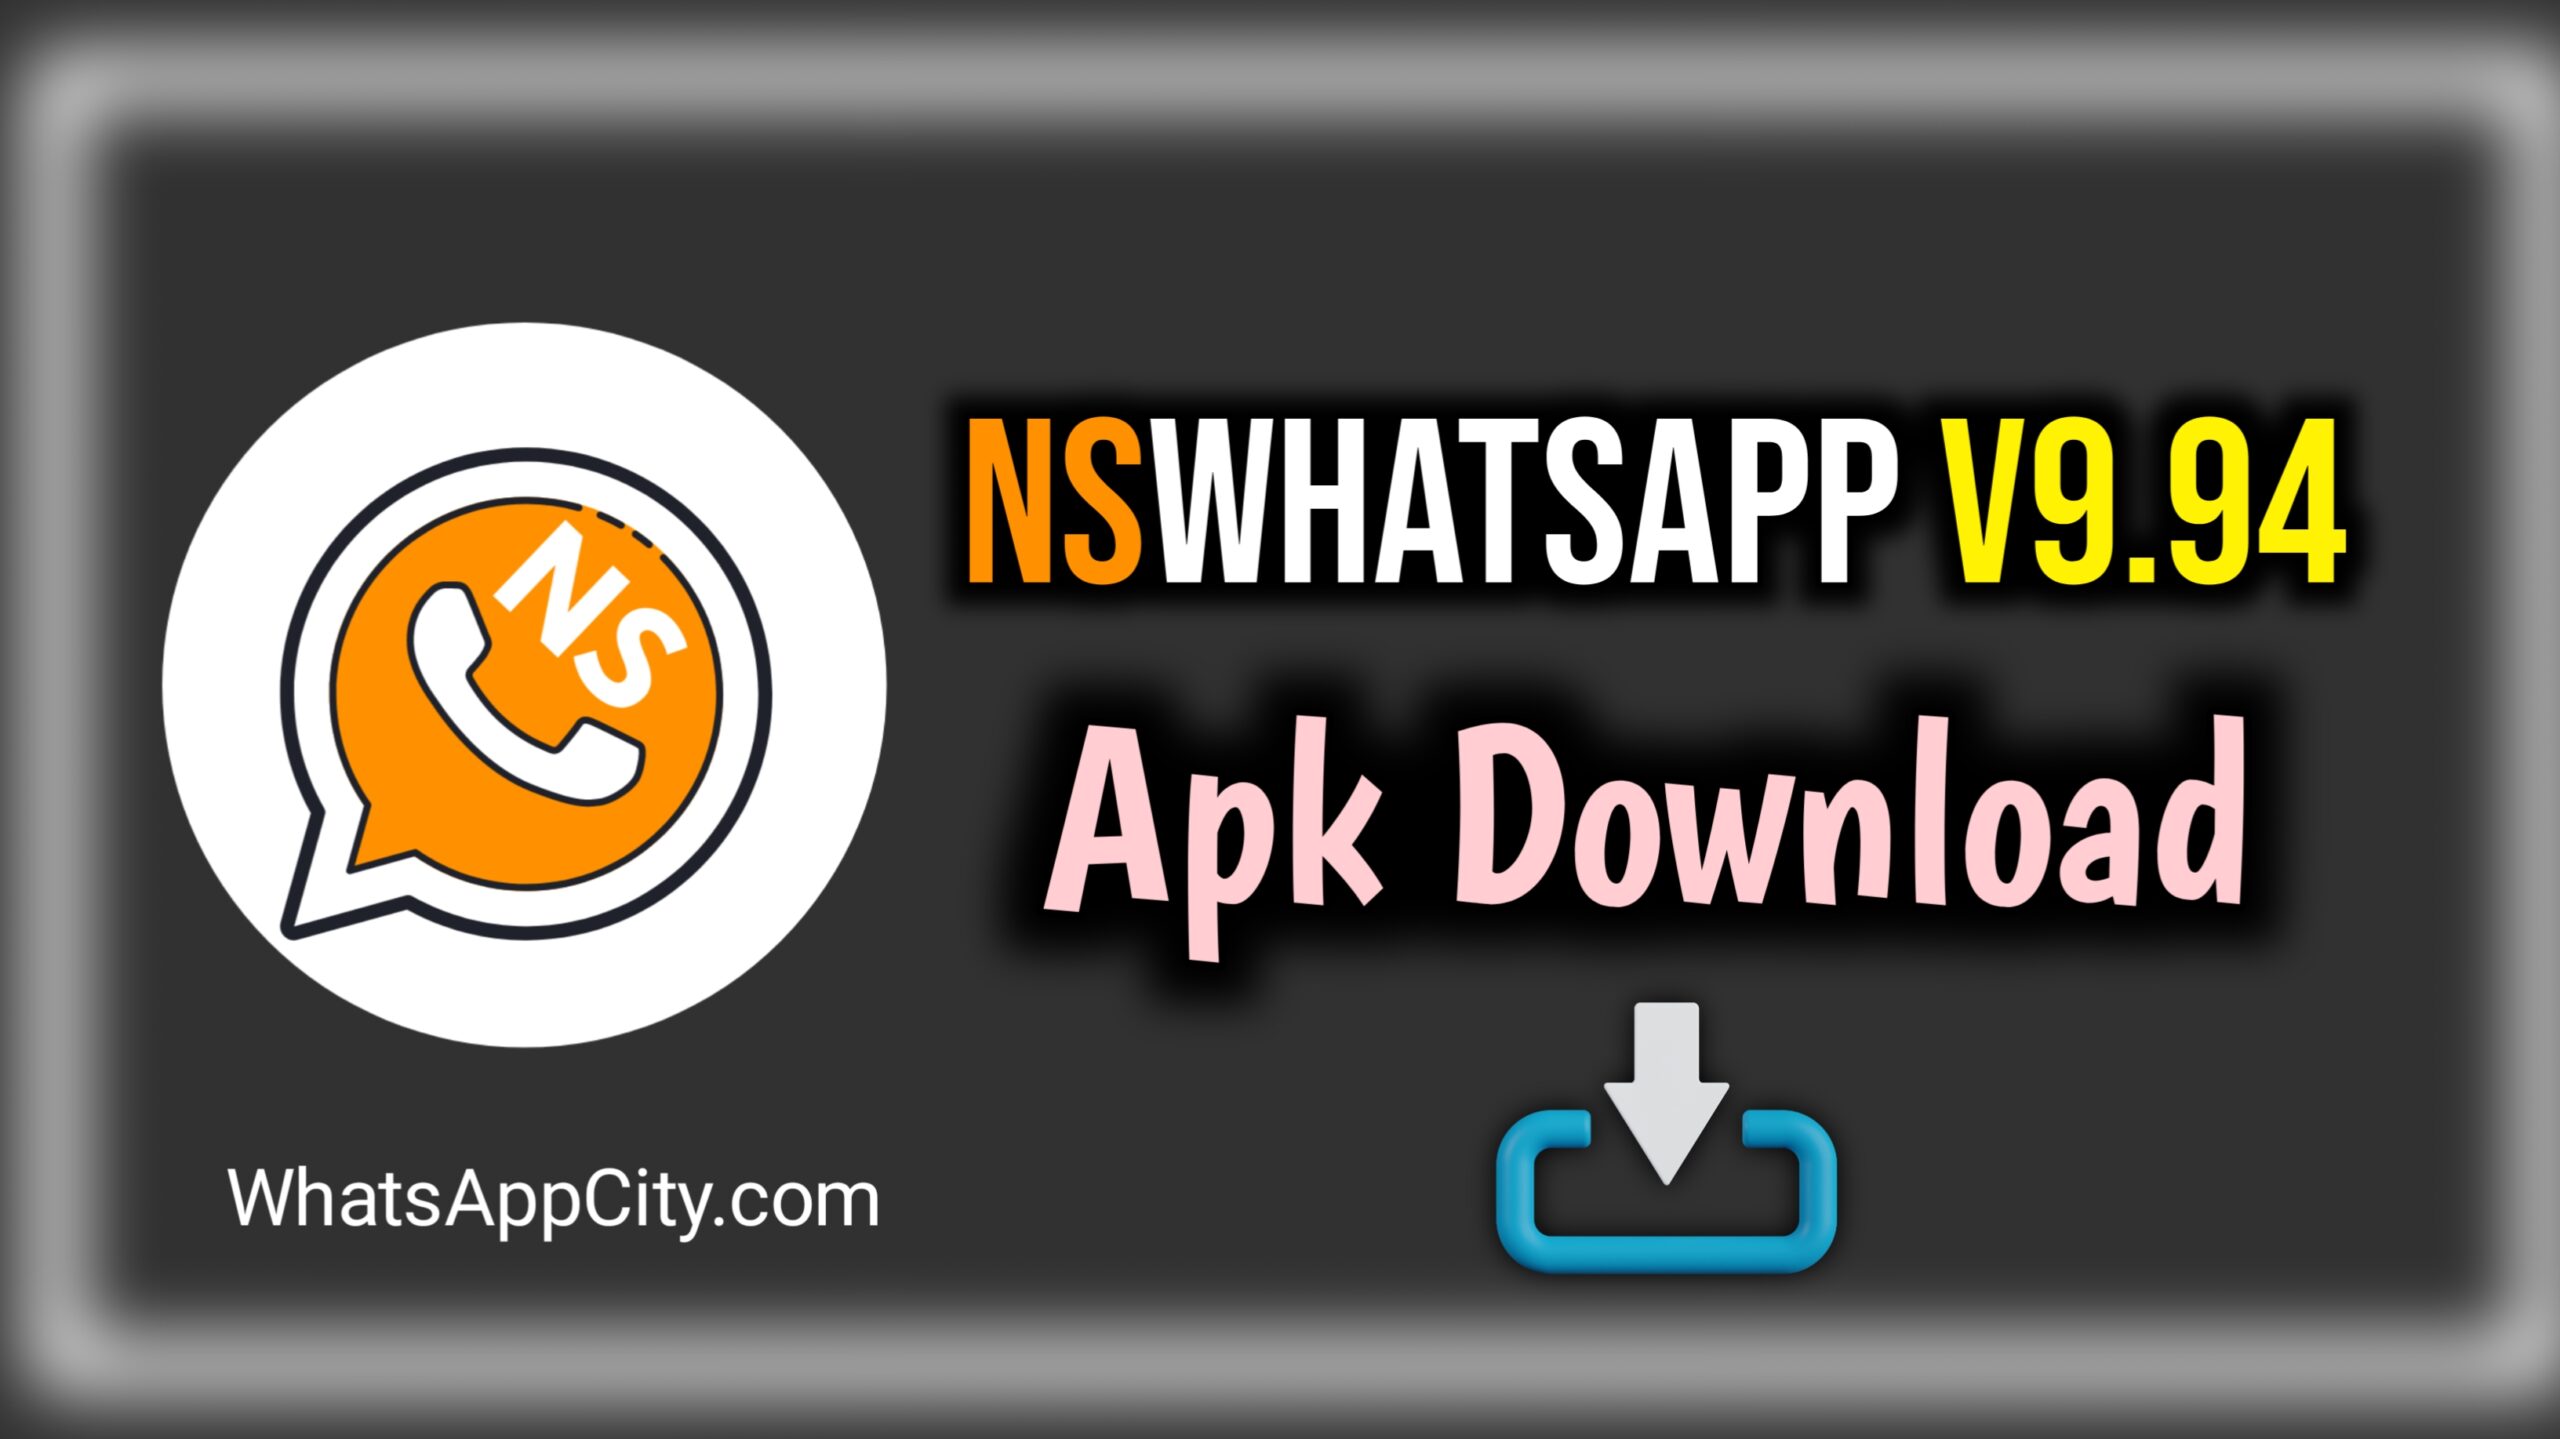 NSWhatsApp 3D v9.94 APK - Download and Installation Guide